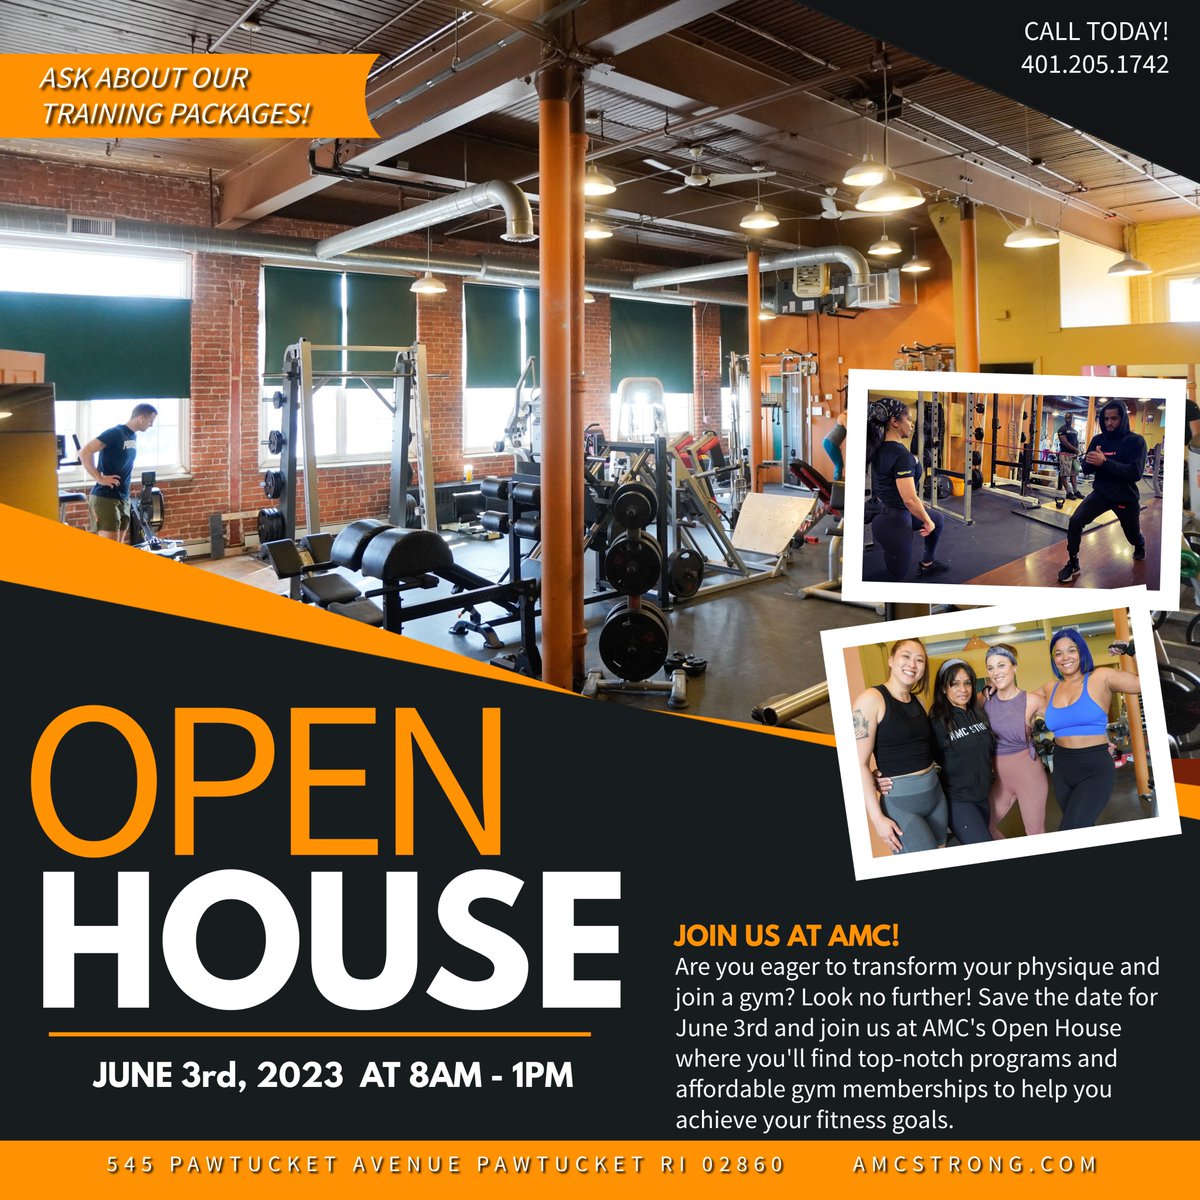 Hey #RhodeIsland we are having an open house right now @ 545 Pawtucket Avenu😀e, Pawtucket, RI 02860 RIGHT NOW!!! If you've ever been curious about our gym, today is the day to stop by! #PawtucketRI